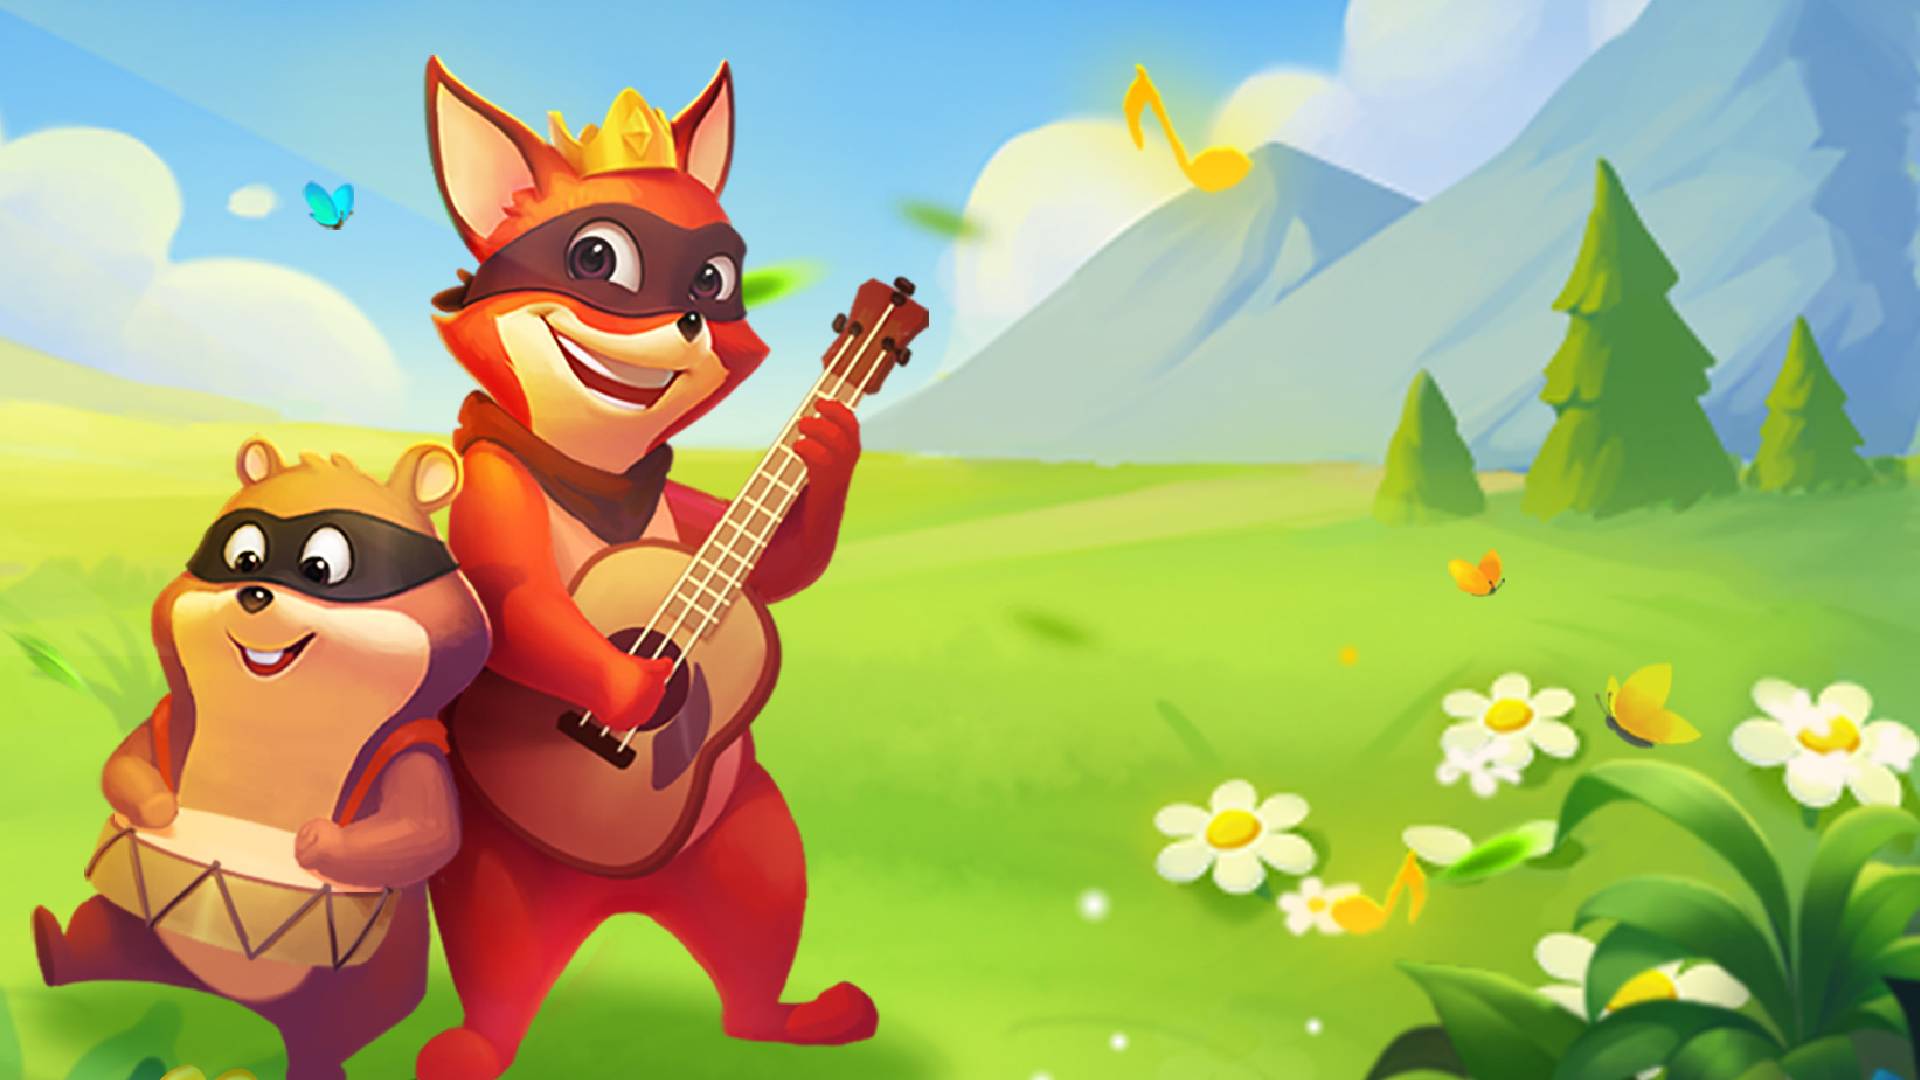 Crazy Fox free spins daily links, tips, and codes Pocket Tactics